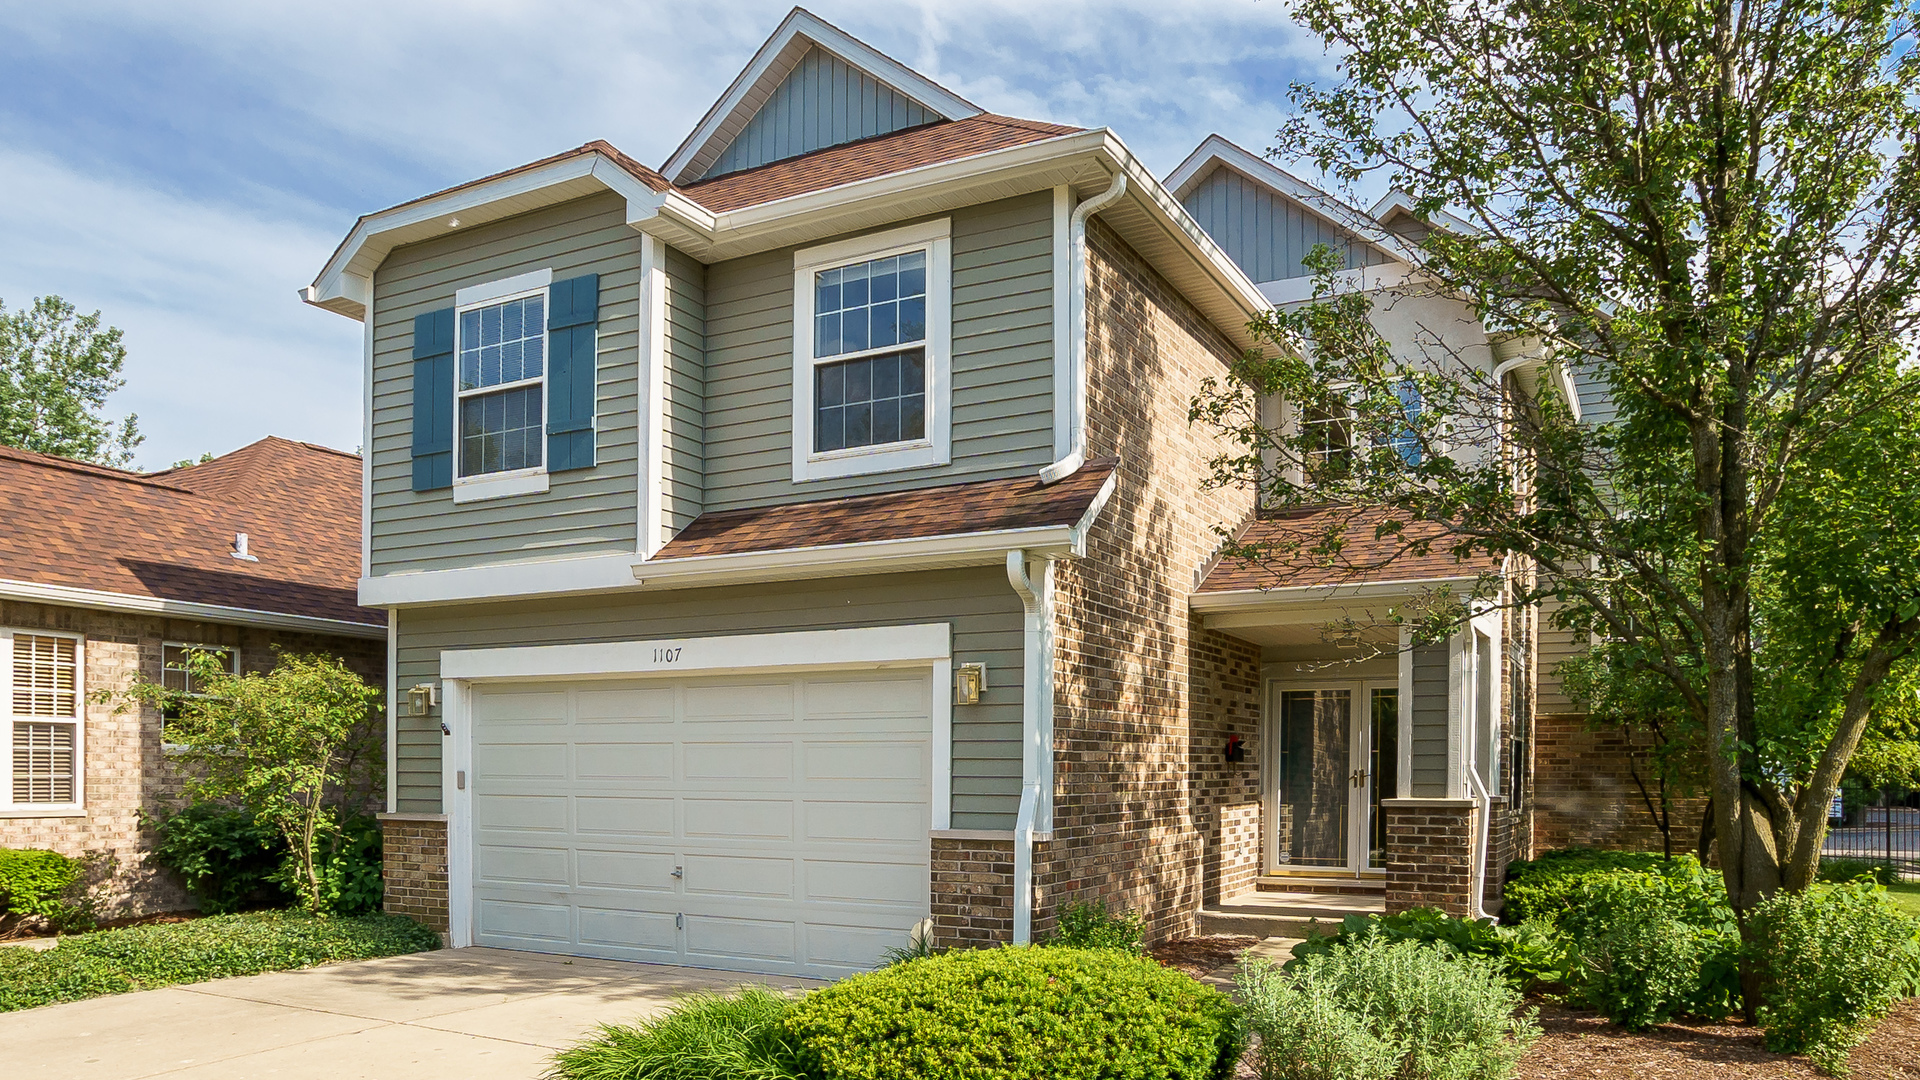 Berkshire in Oakbrook Terrace IL Homes for Sale - Berkshire in Oakbrook Terrace Real Estate ...